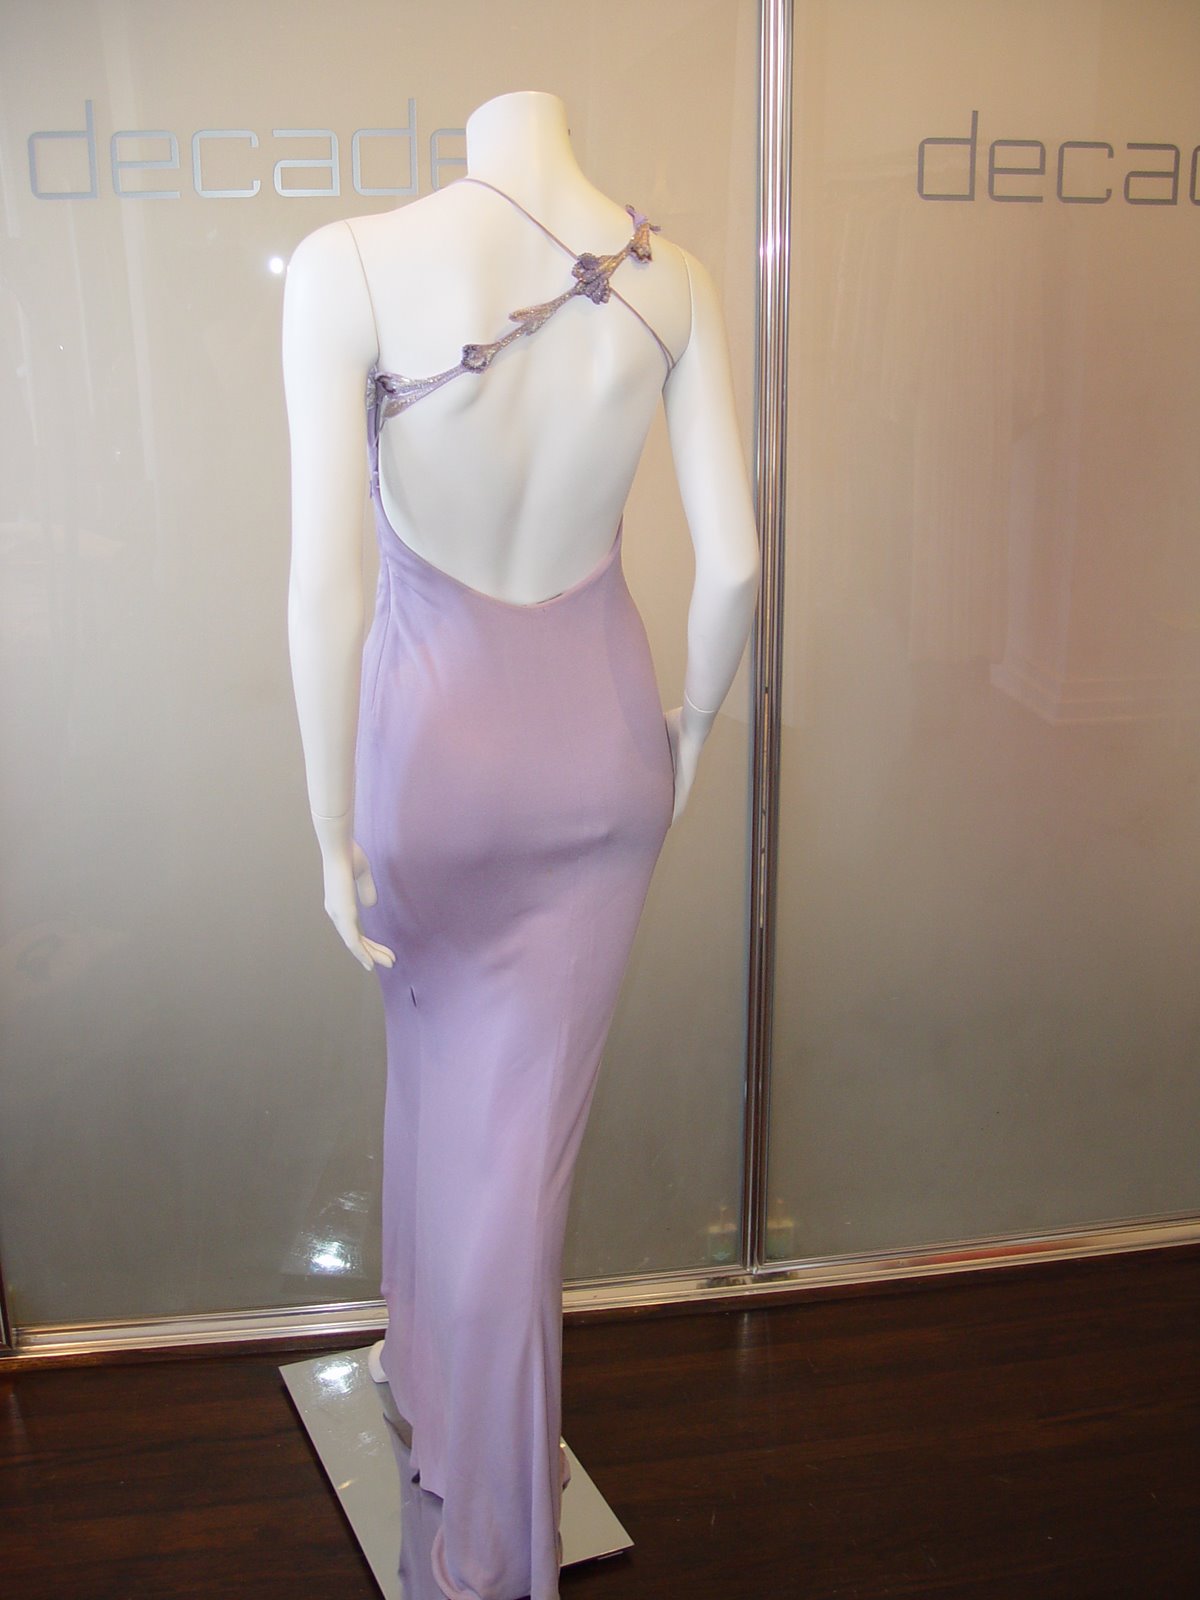 [GIANNI+VERSACE+LILAC+90S+EVENING+GOWN+WITH+CRISS+CROSS+EMROIDERED+STRAP+SIZE+4.JPG+(1).JPG]